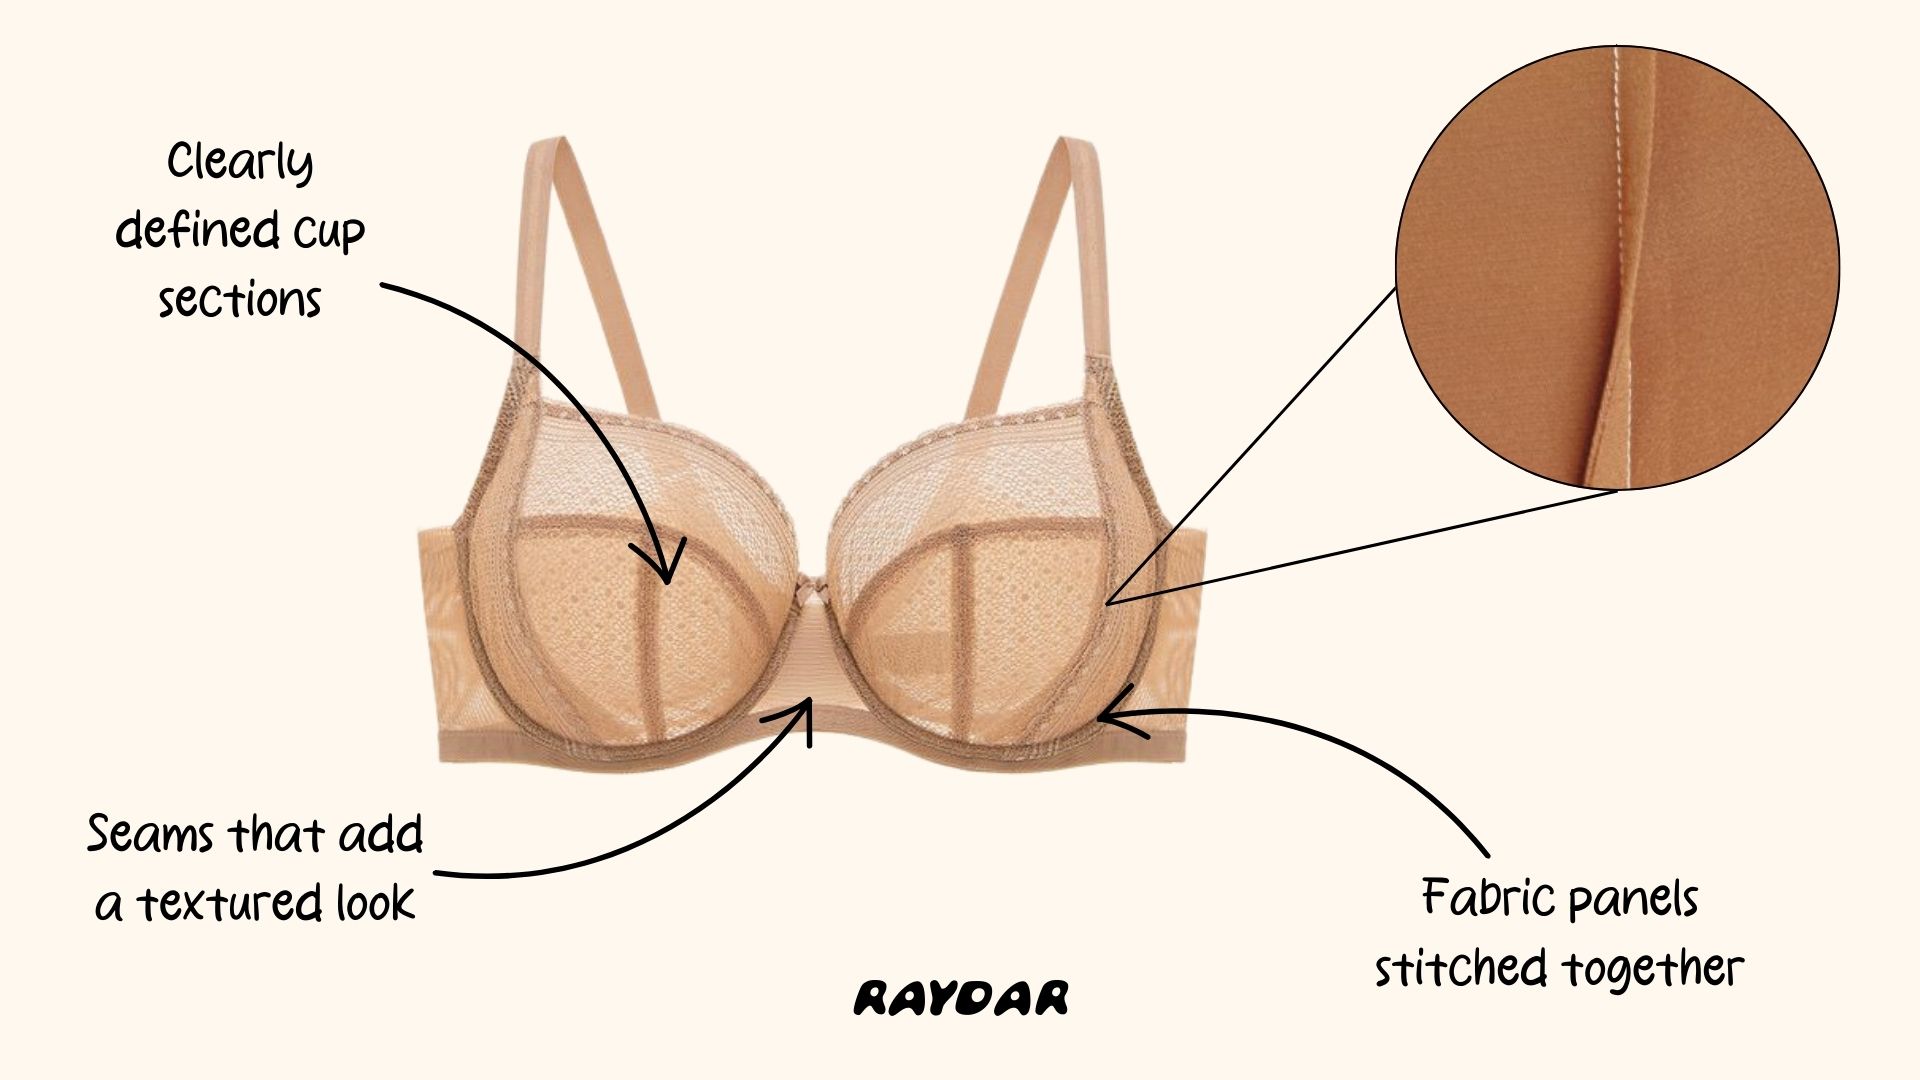 What Is A Seam Raydar